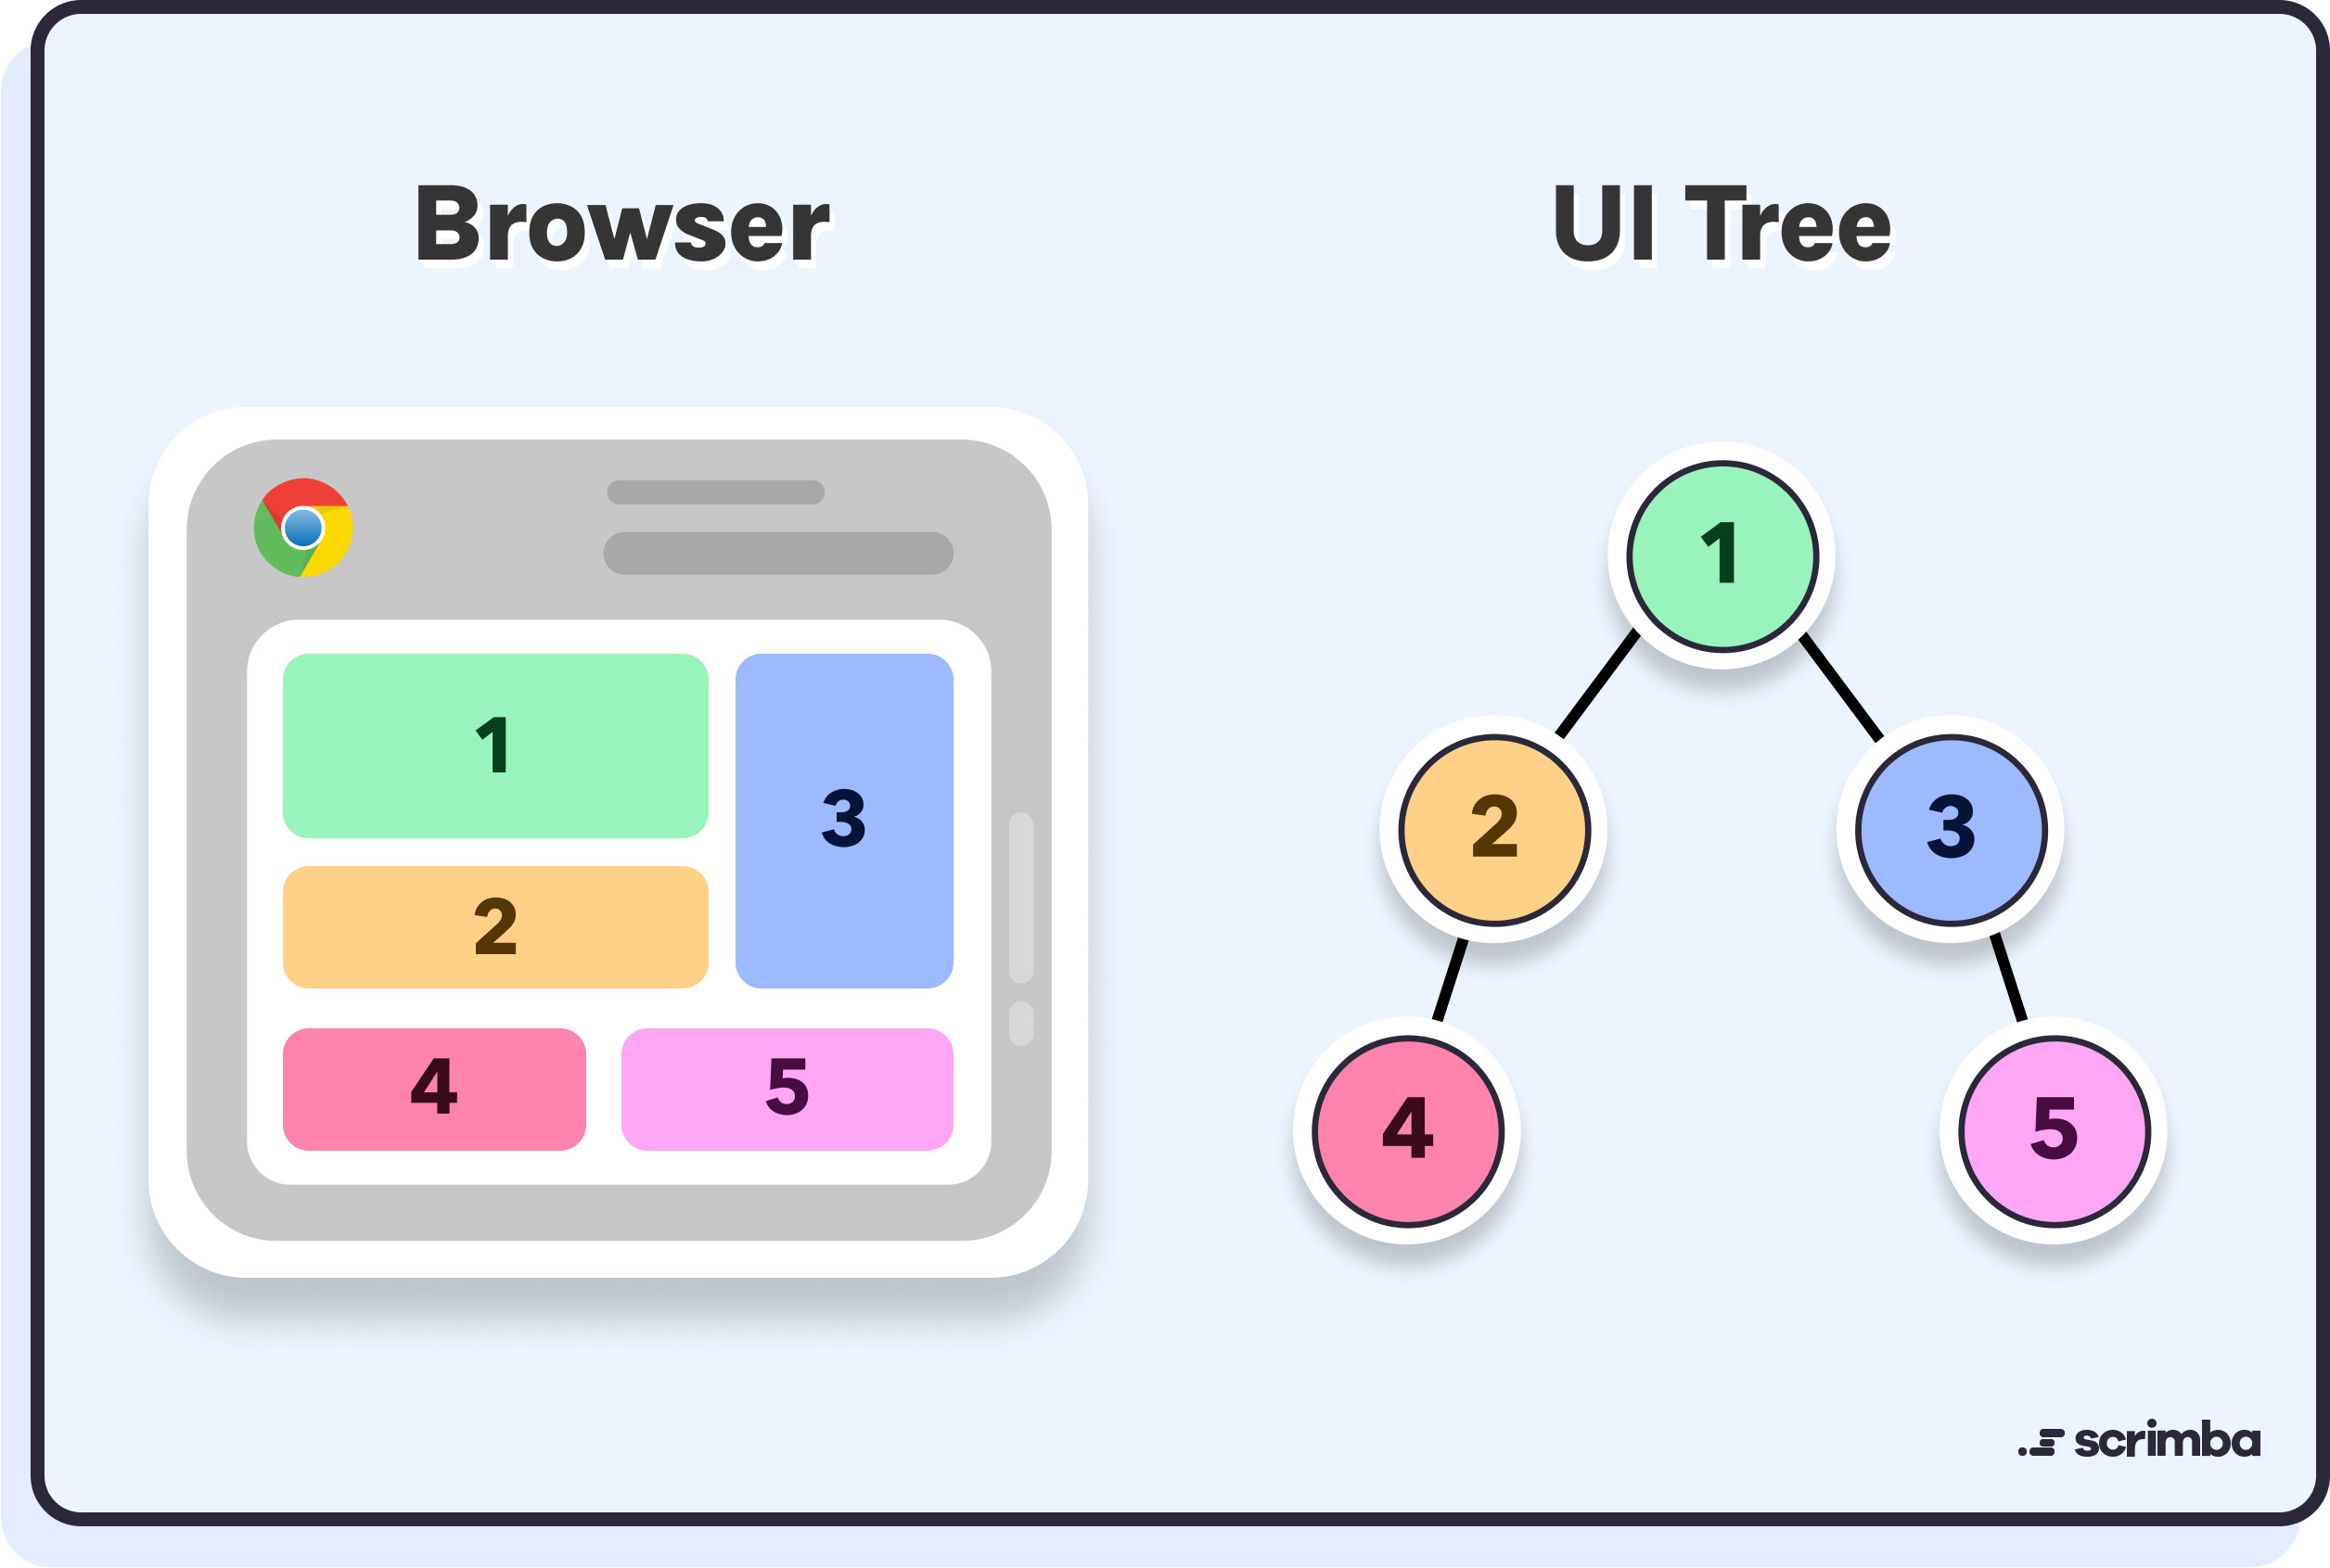 Browser and UI Tree